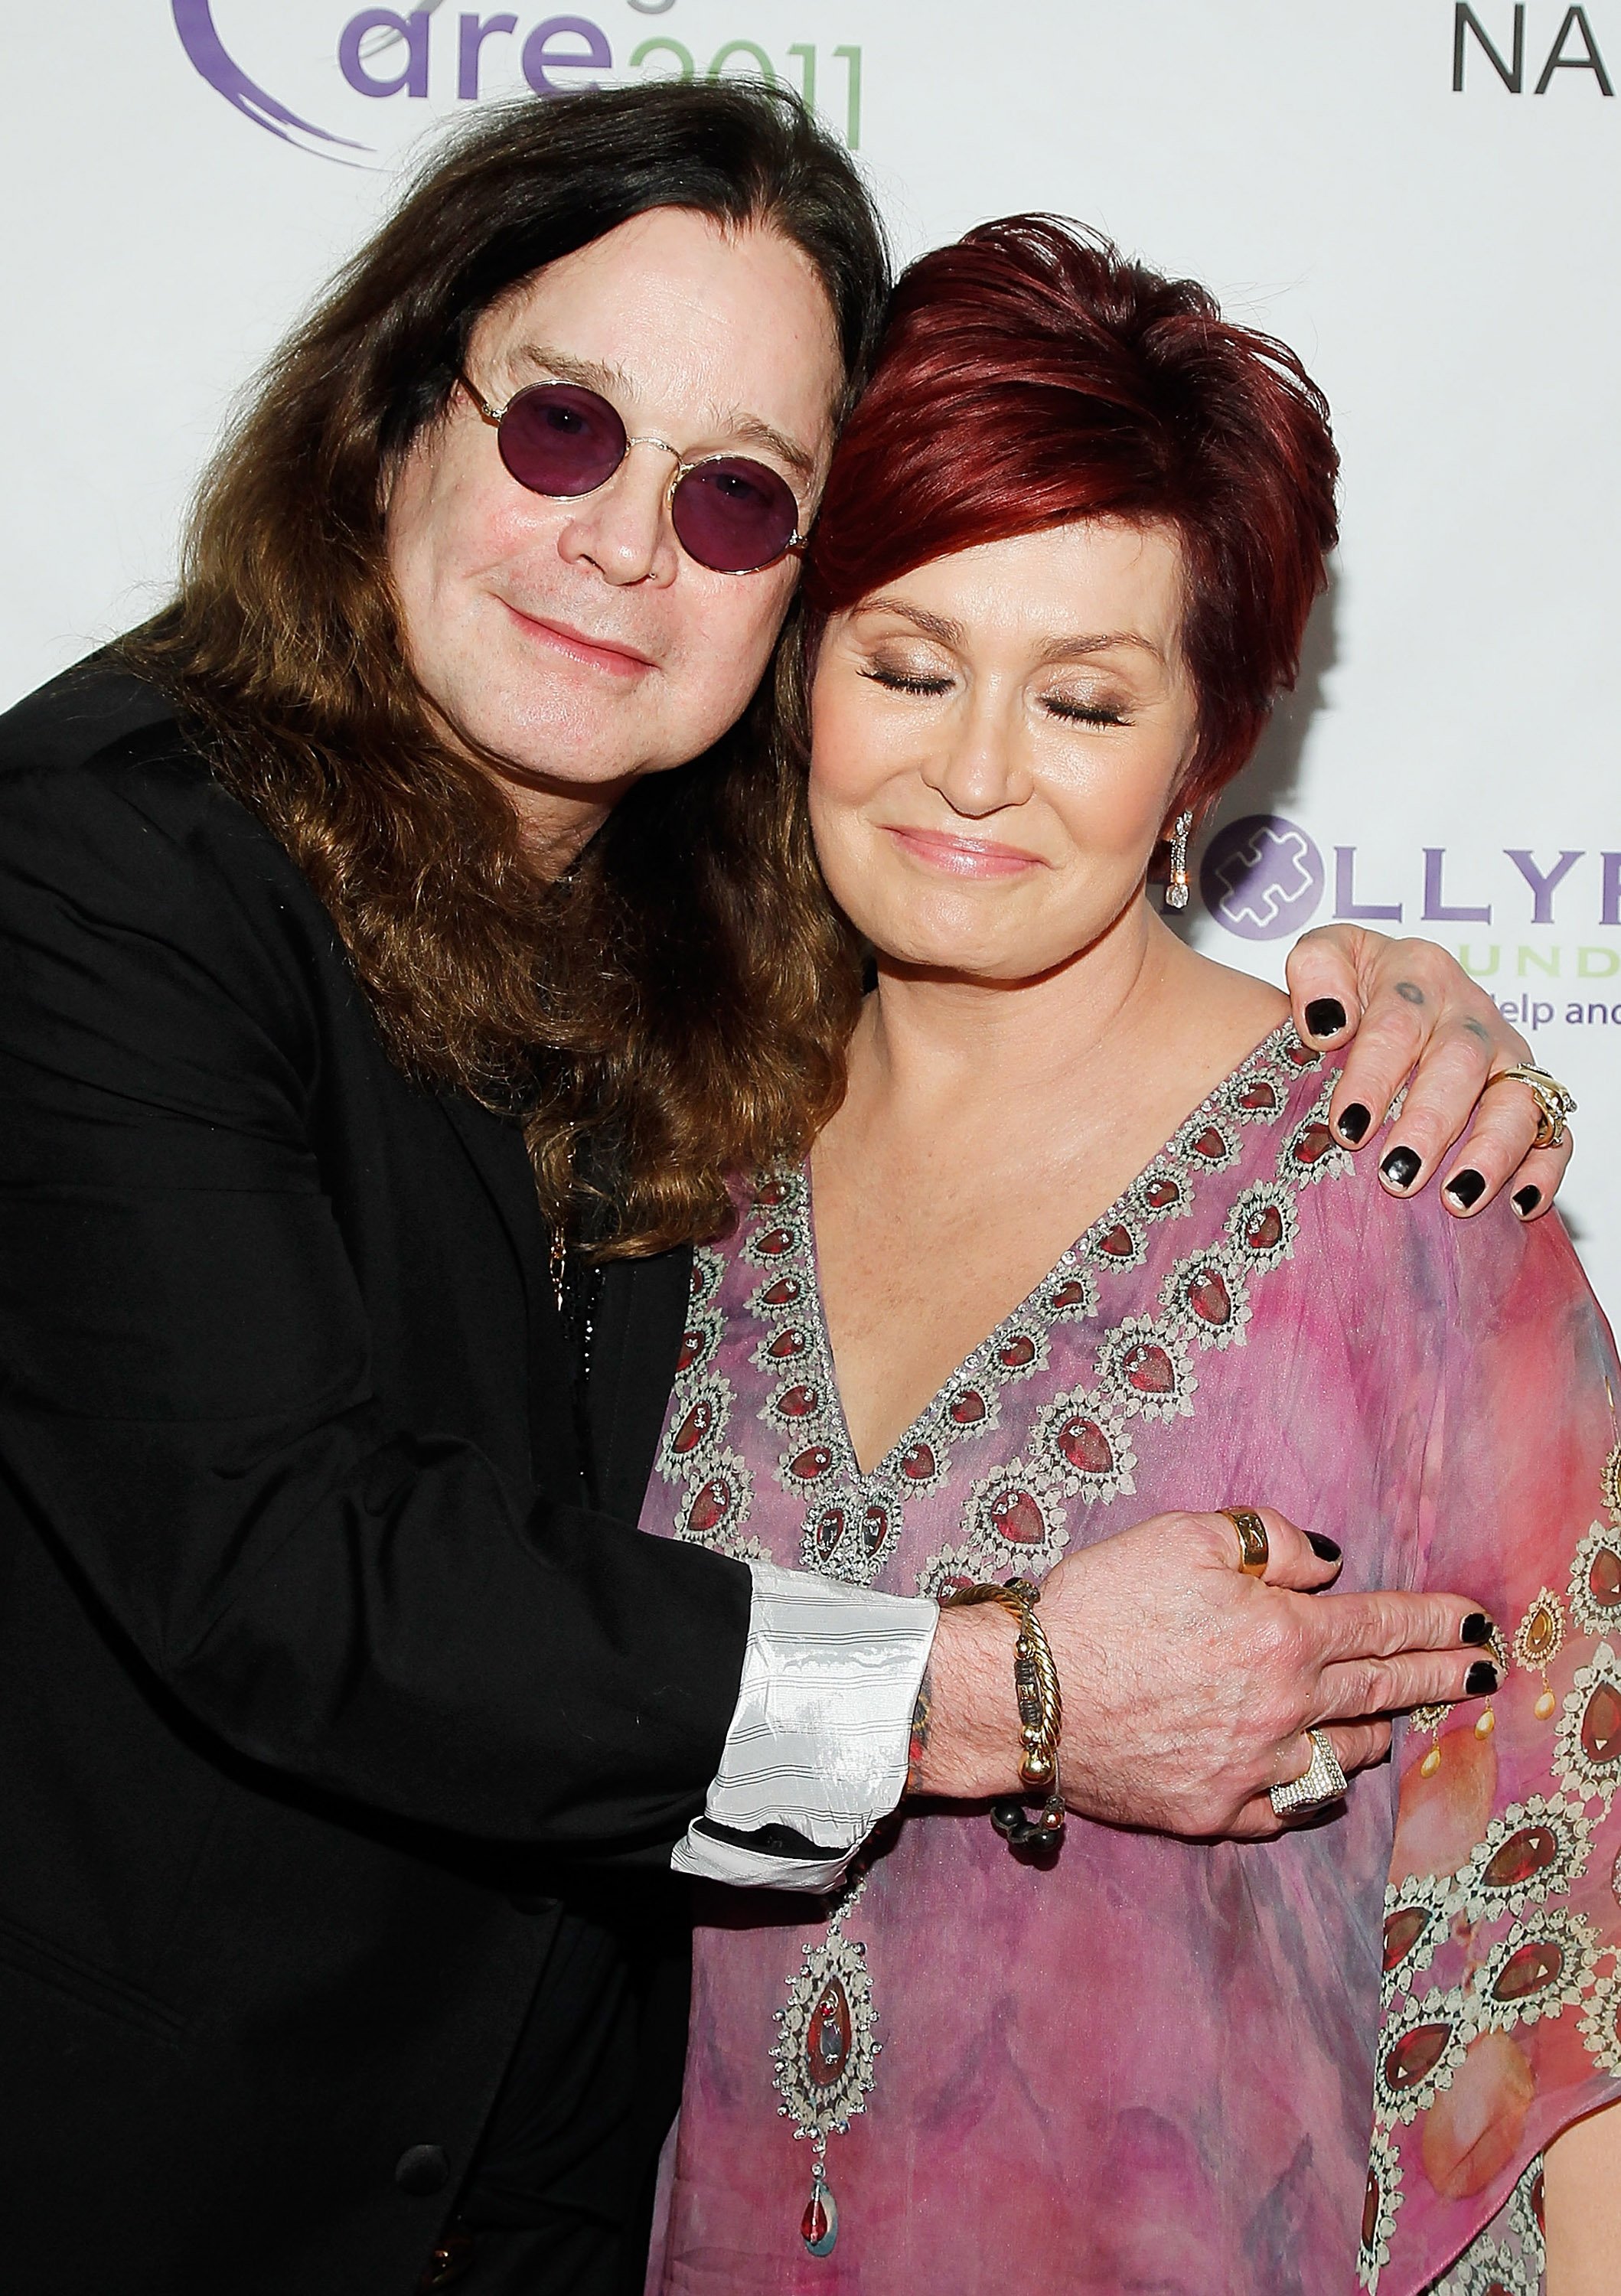 Ozzy Osbourne and his wife Sharon Osbourne attend the 13th Annual Design Care Benefiting the HollyRod Foundation on July 23, 2011, in Beverly Hills, California. | Source: Getty Images